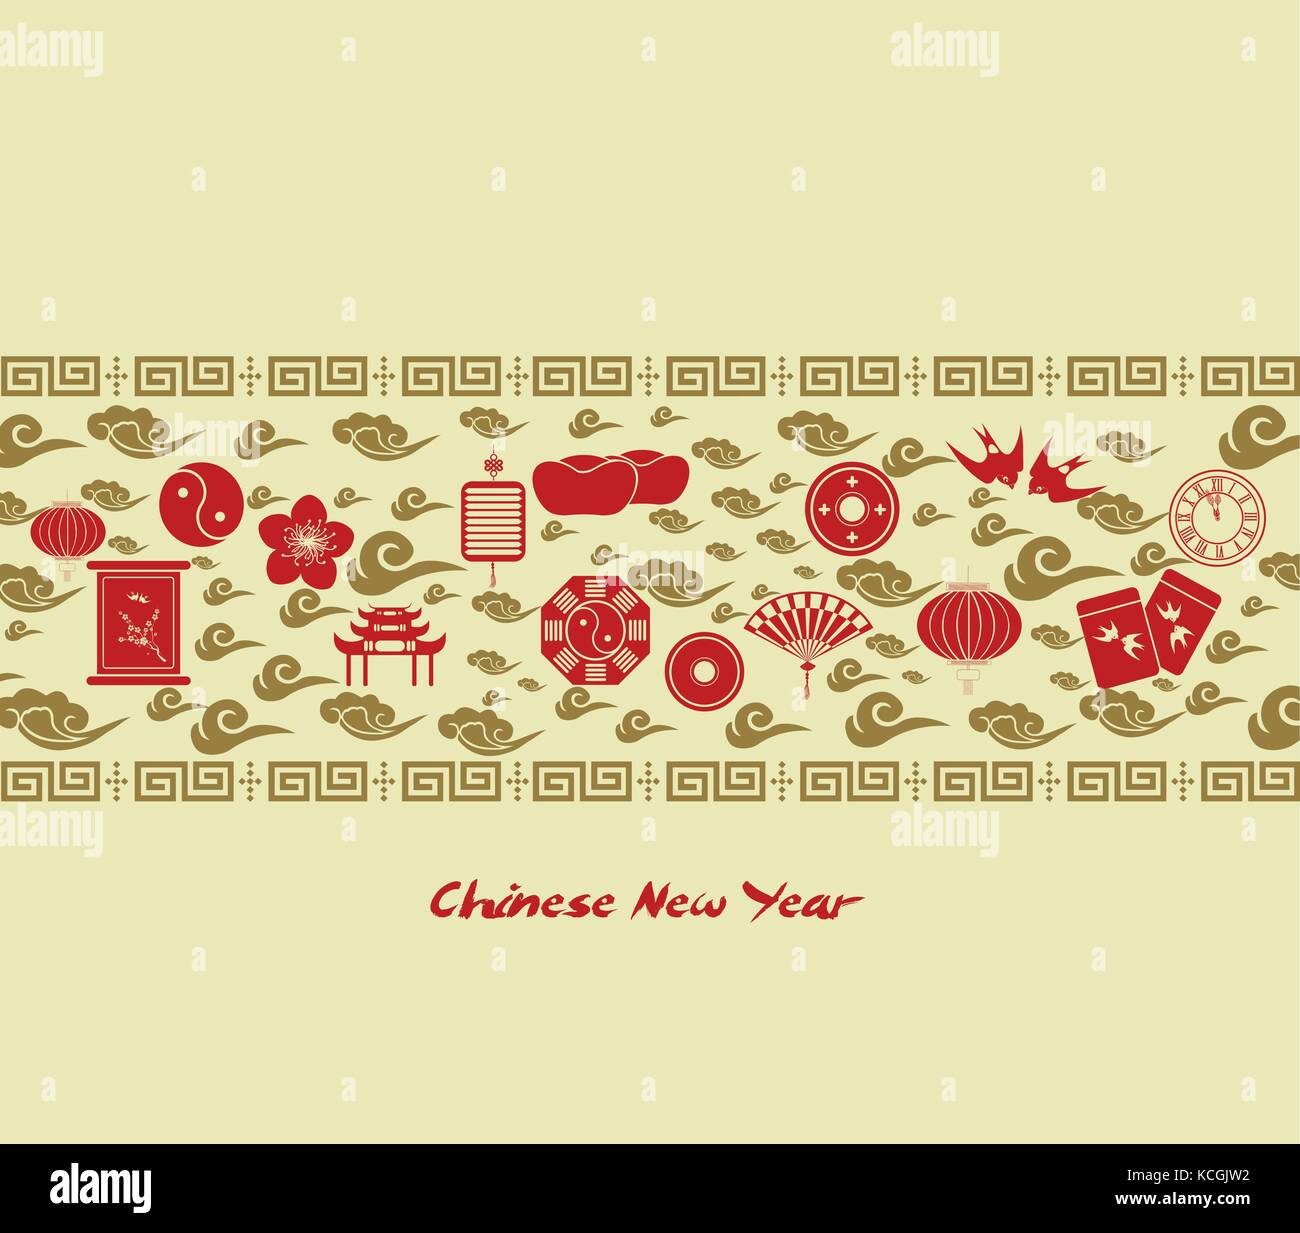 Chinese new year greeting card Stock Vector